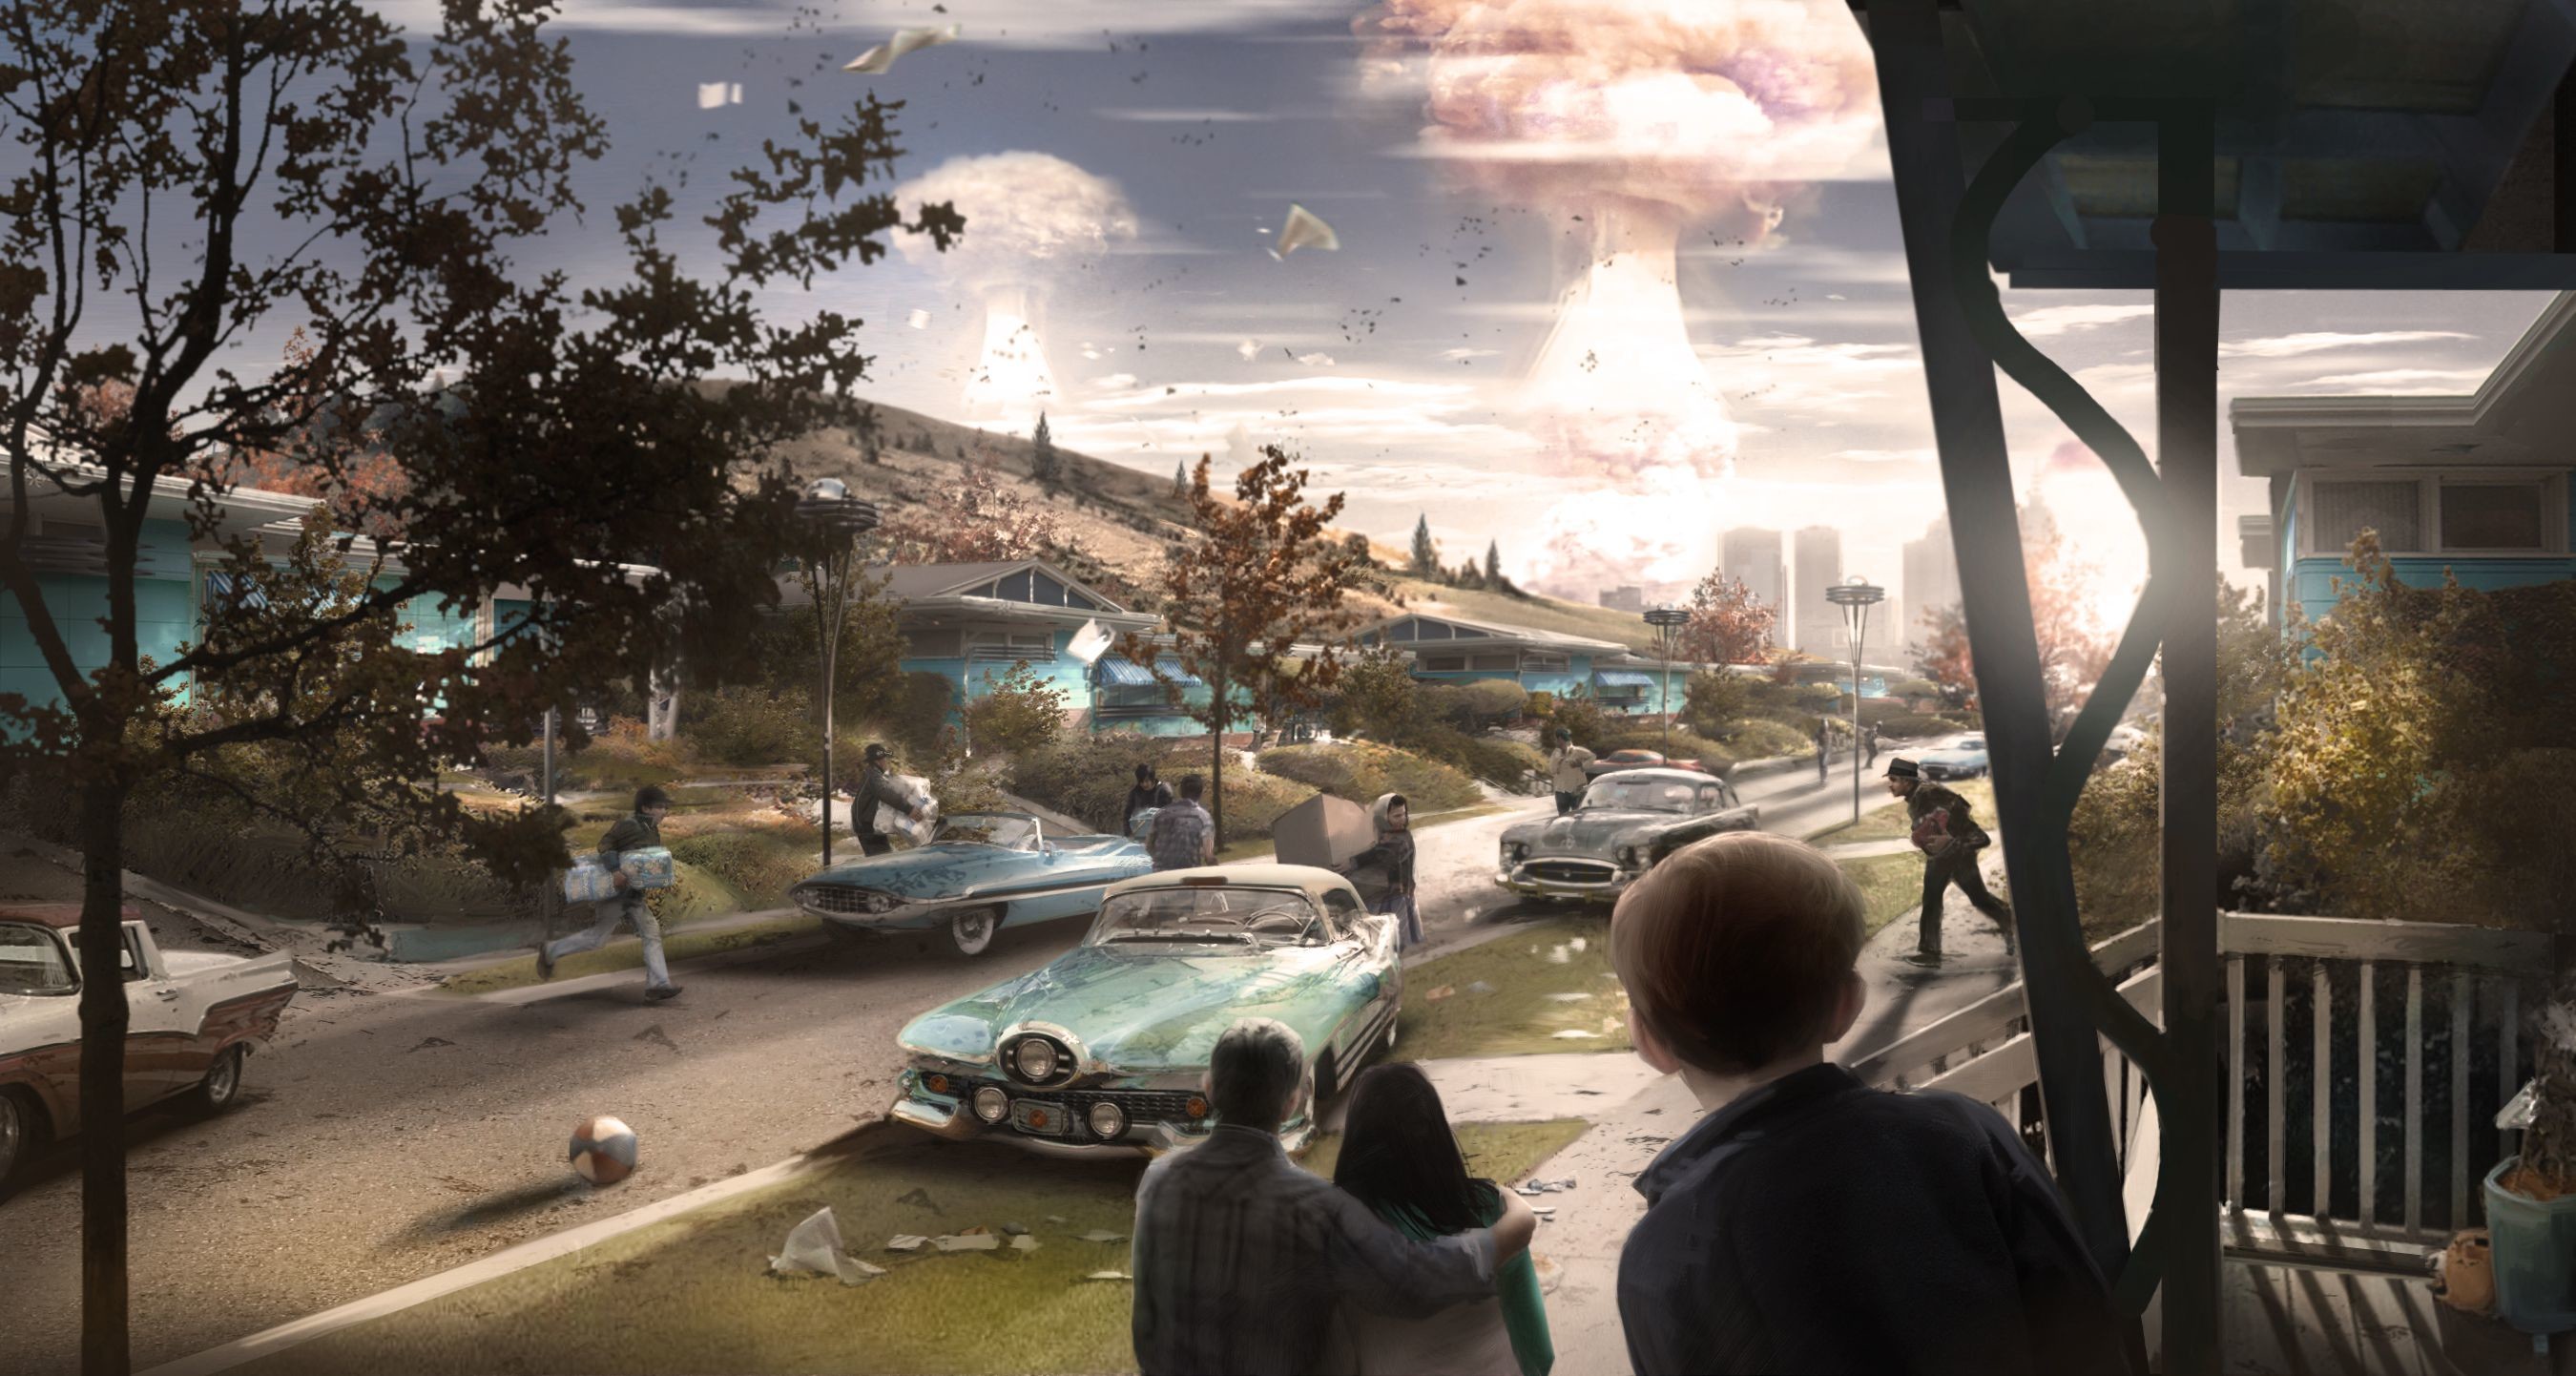 Fallout 4's concept art is wallpaper worthy